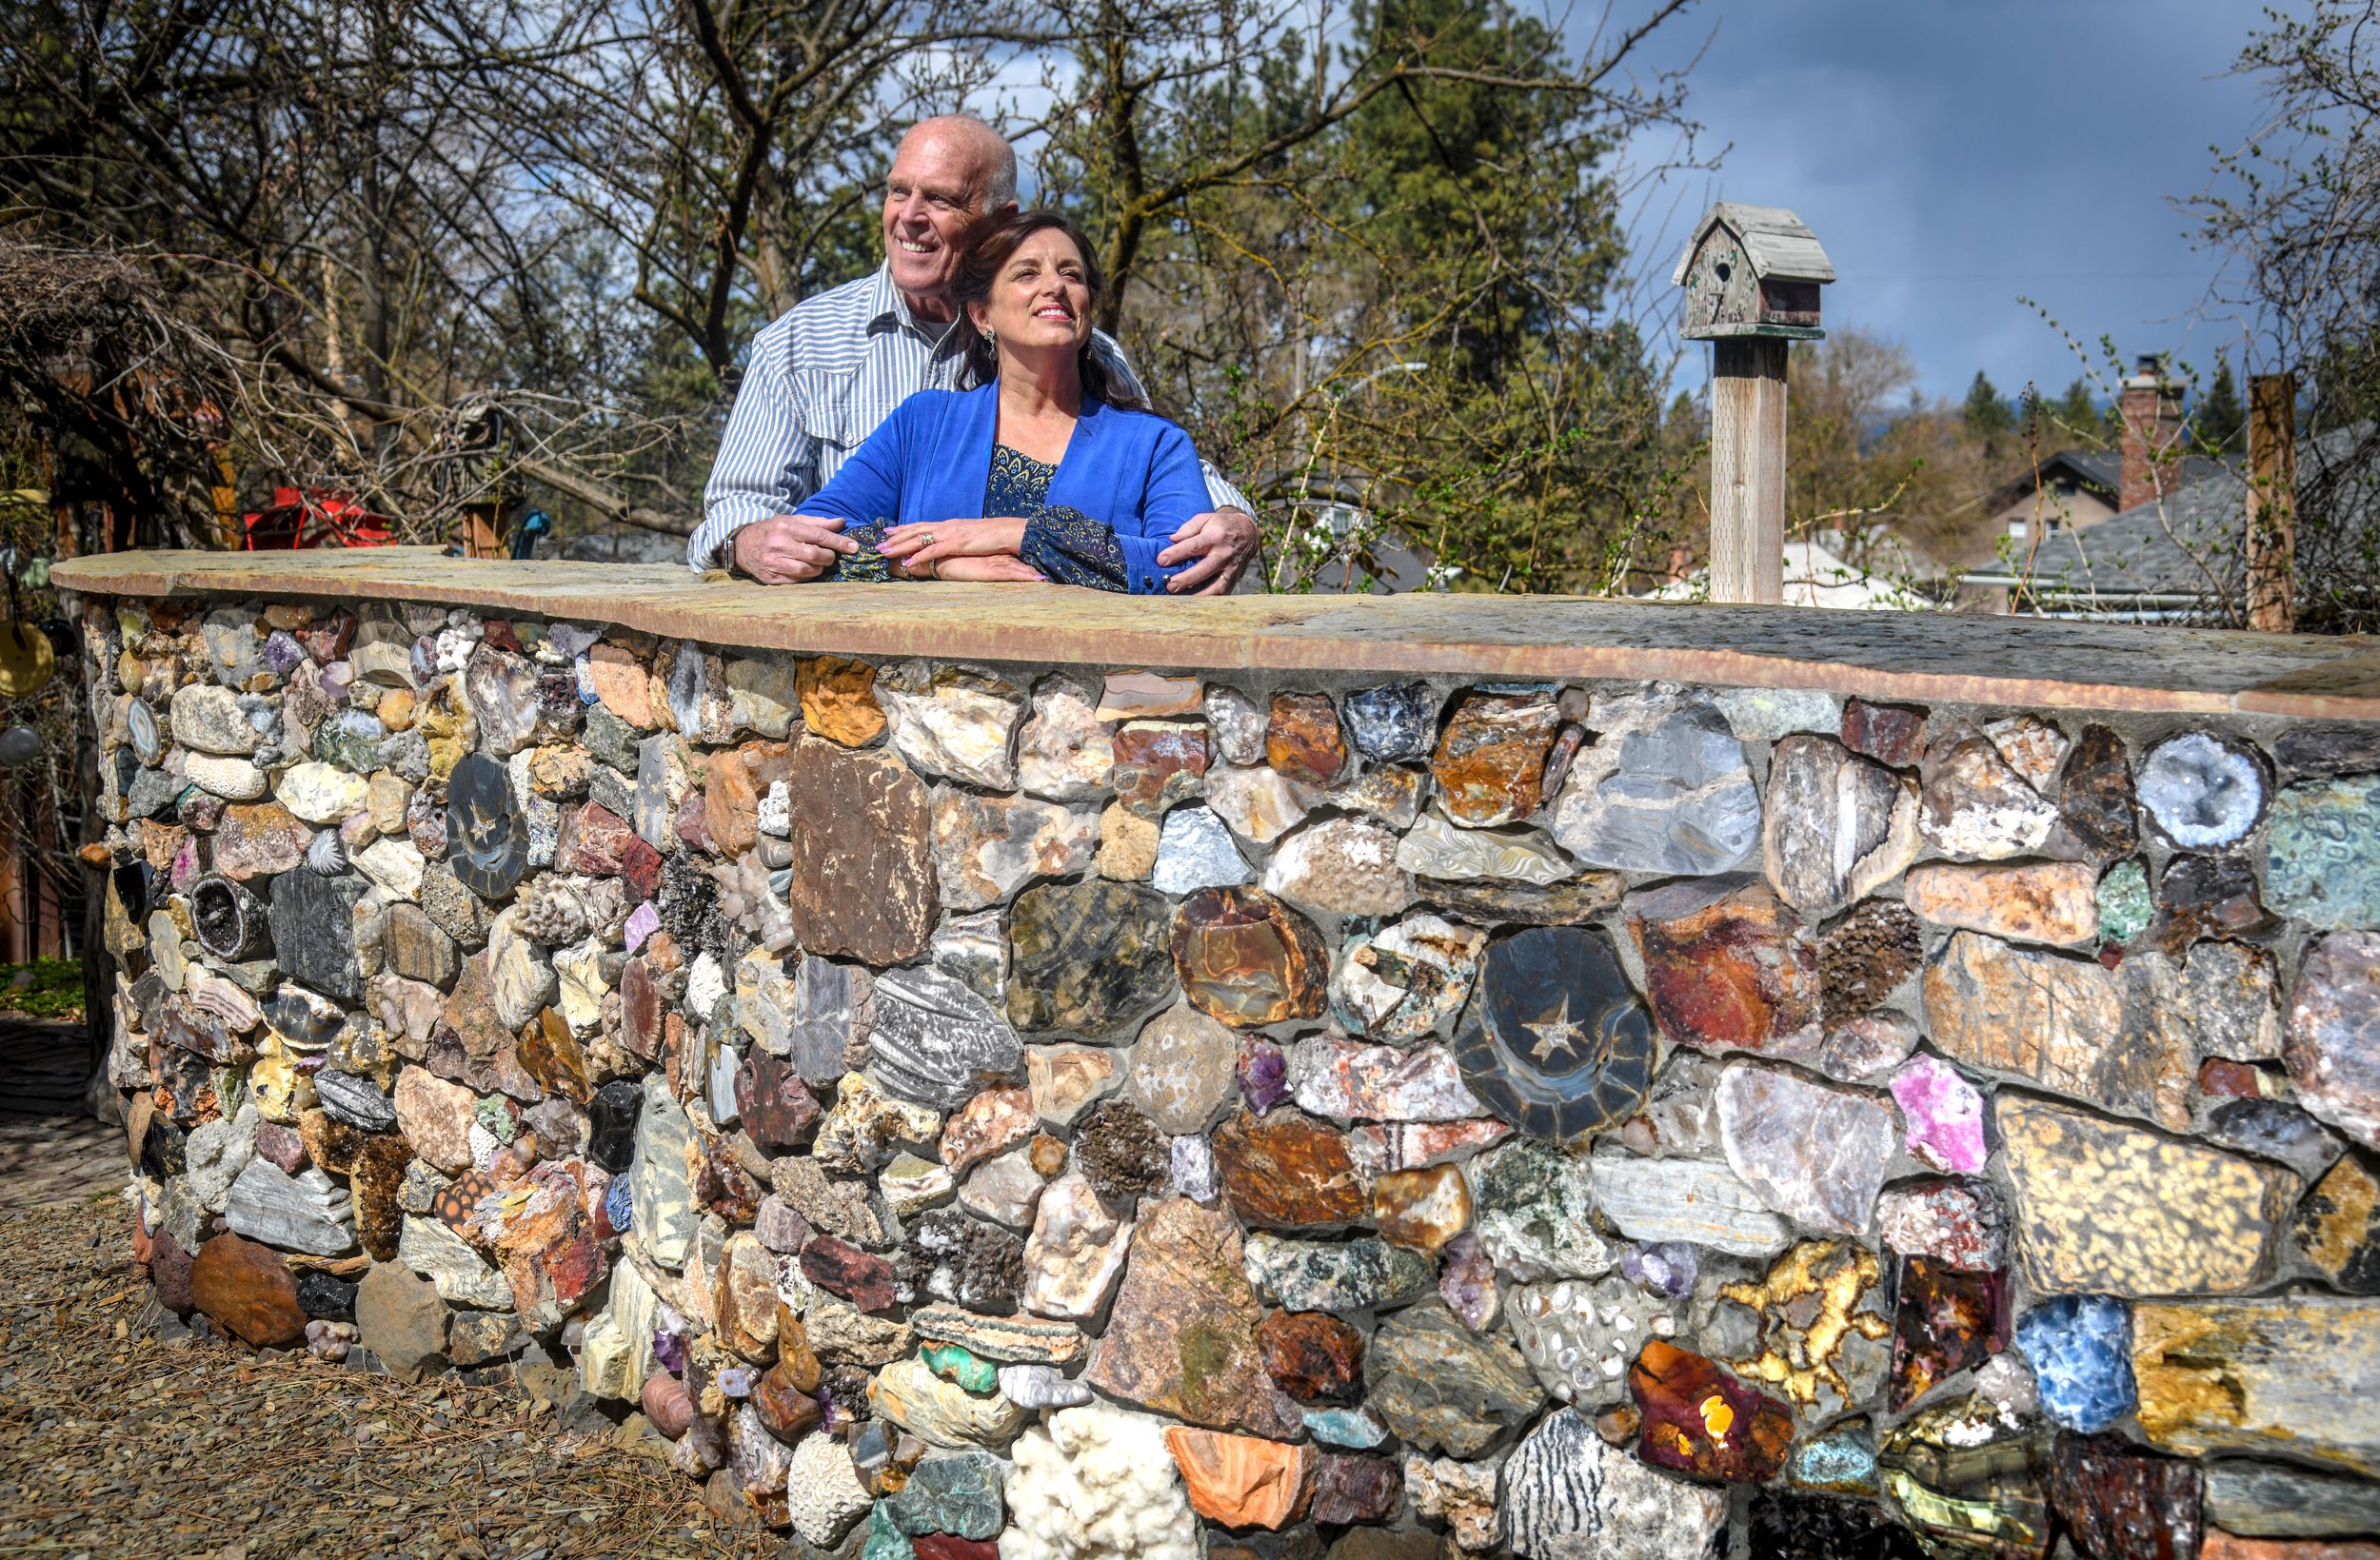 Pandemic projects: Creating wall art: Rockhounds build backyard 'sculpture'  from rock collection